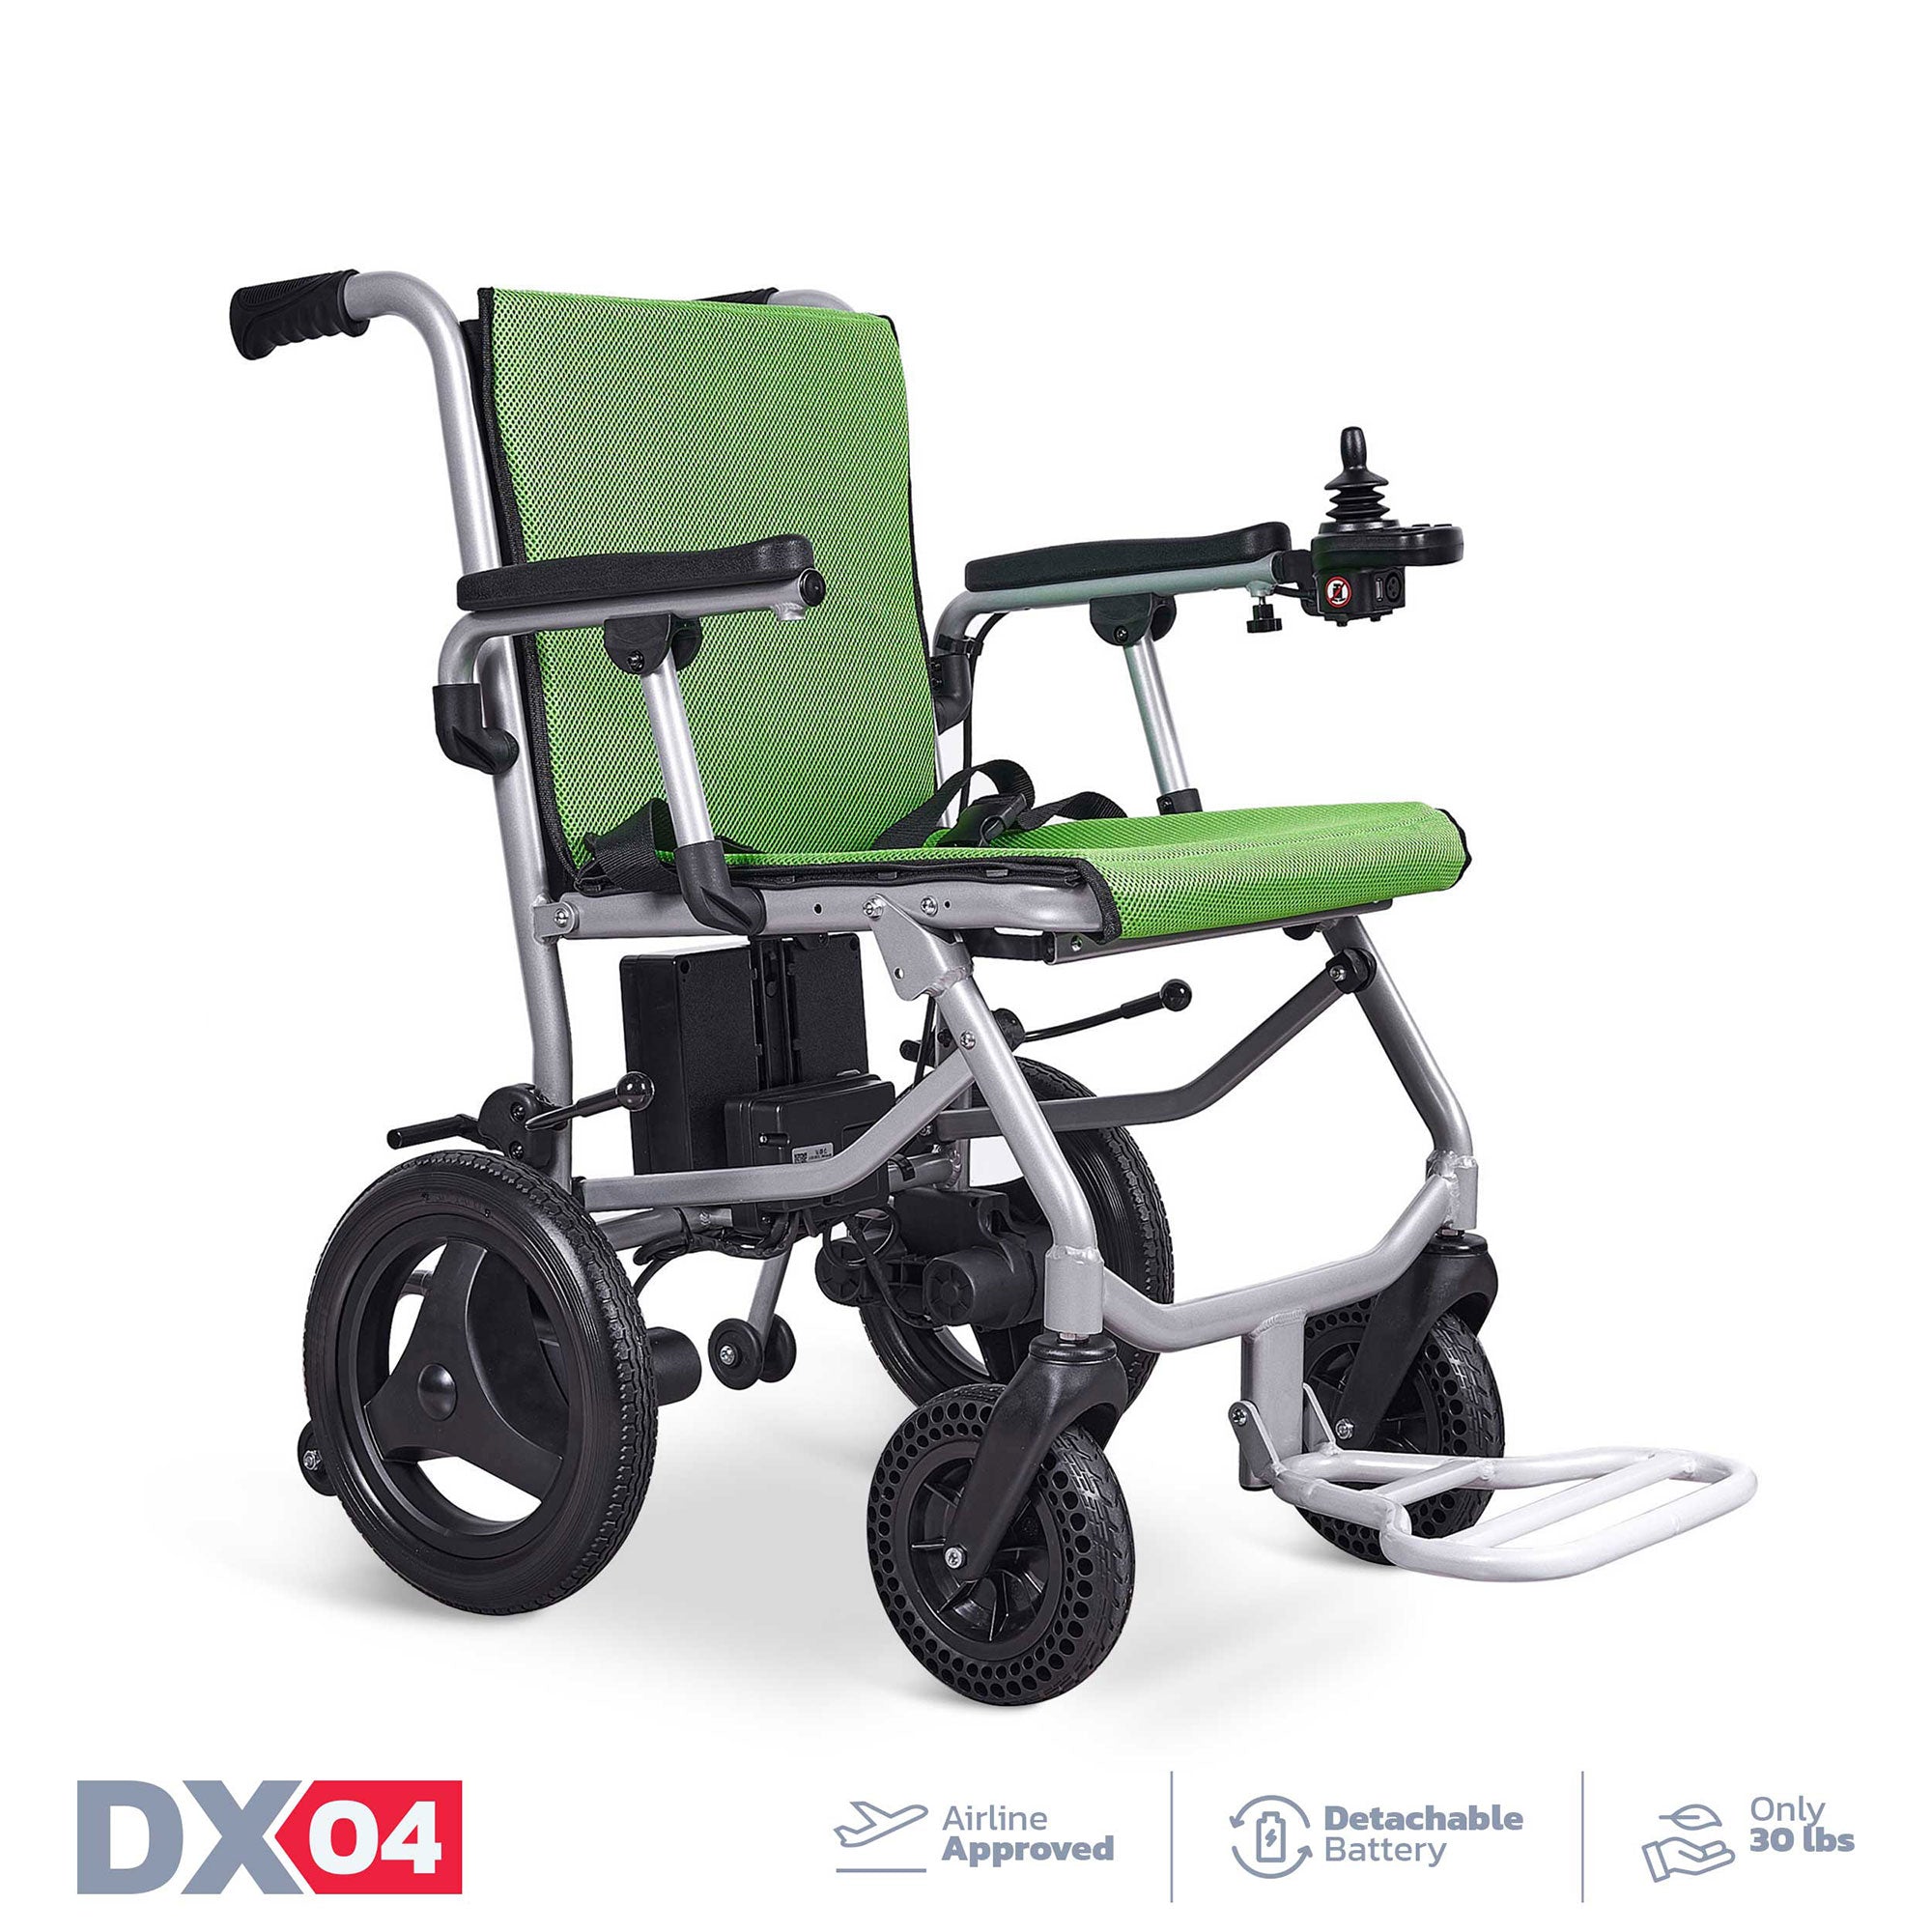 Rubicon DX04 - The World's Lightest Electric Wheelchair - Electricwheelchair.Store